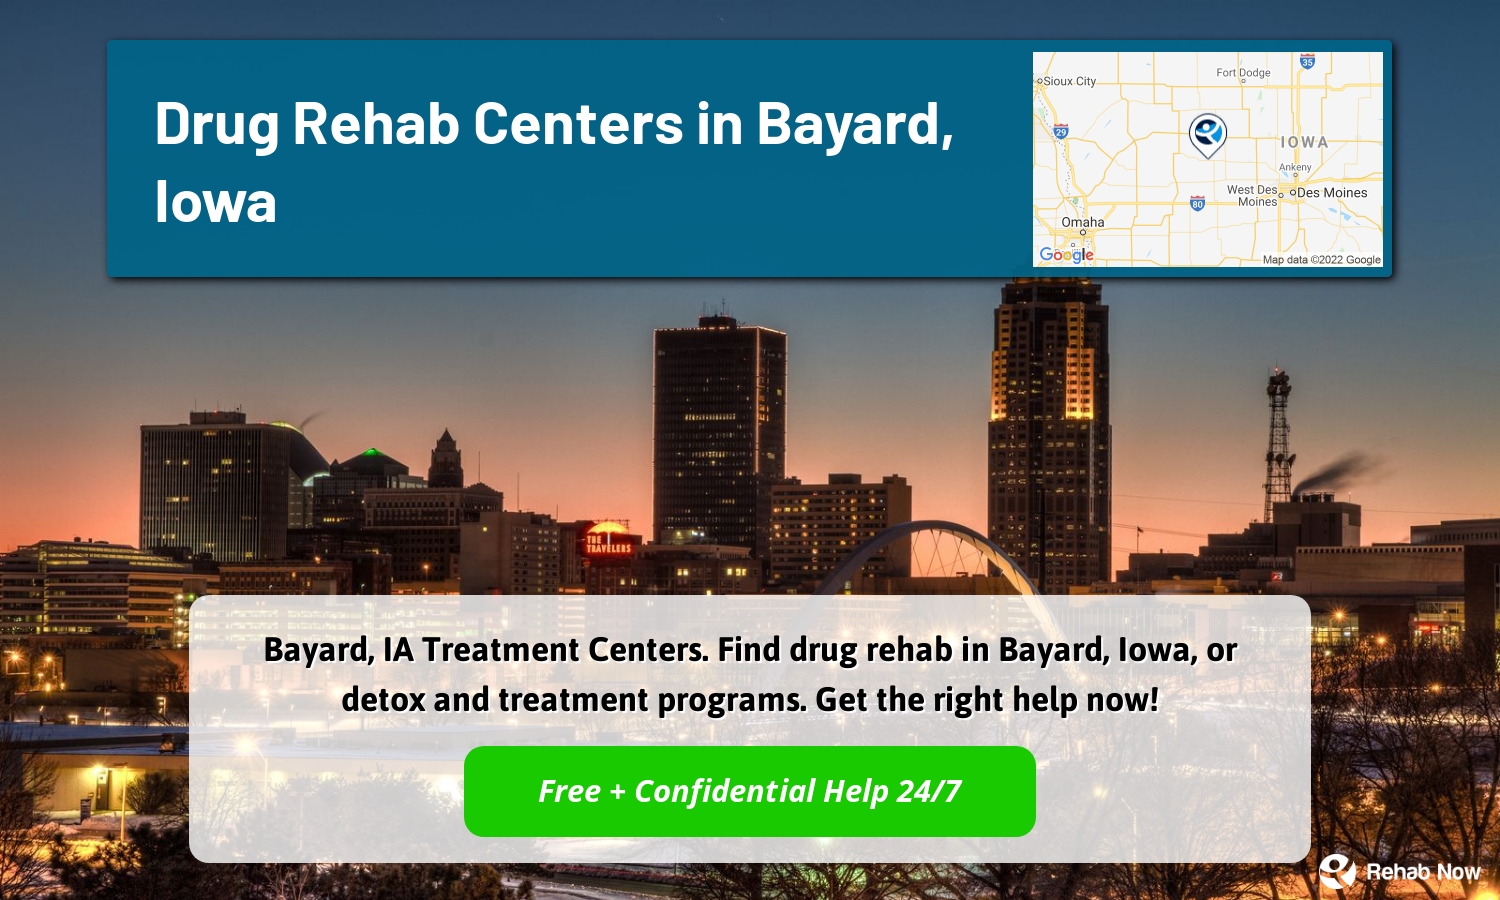 Bayard, IA Treatment Centers. Find drug rehab in Bayard, Iowa, or detox and treatment programs. Get the right help now!